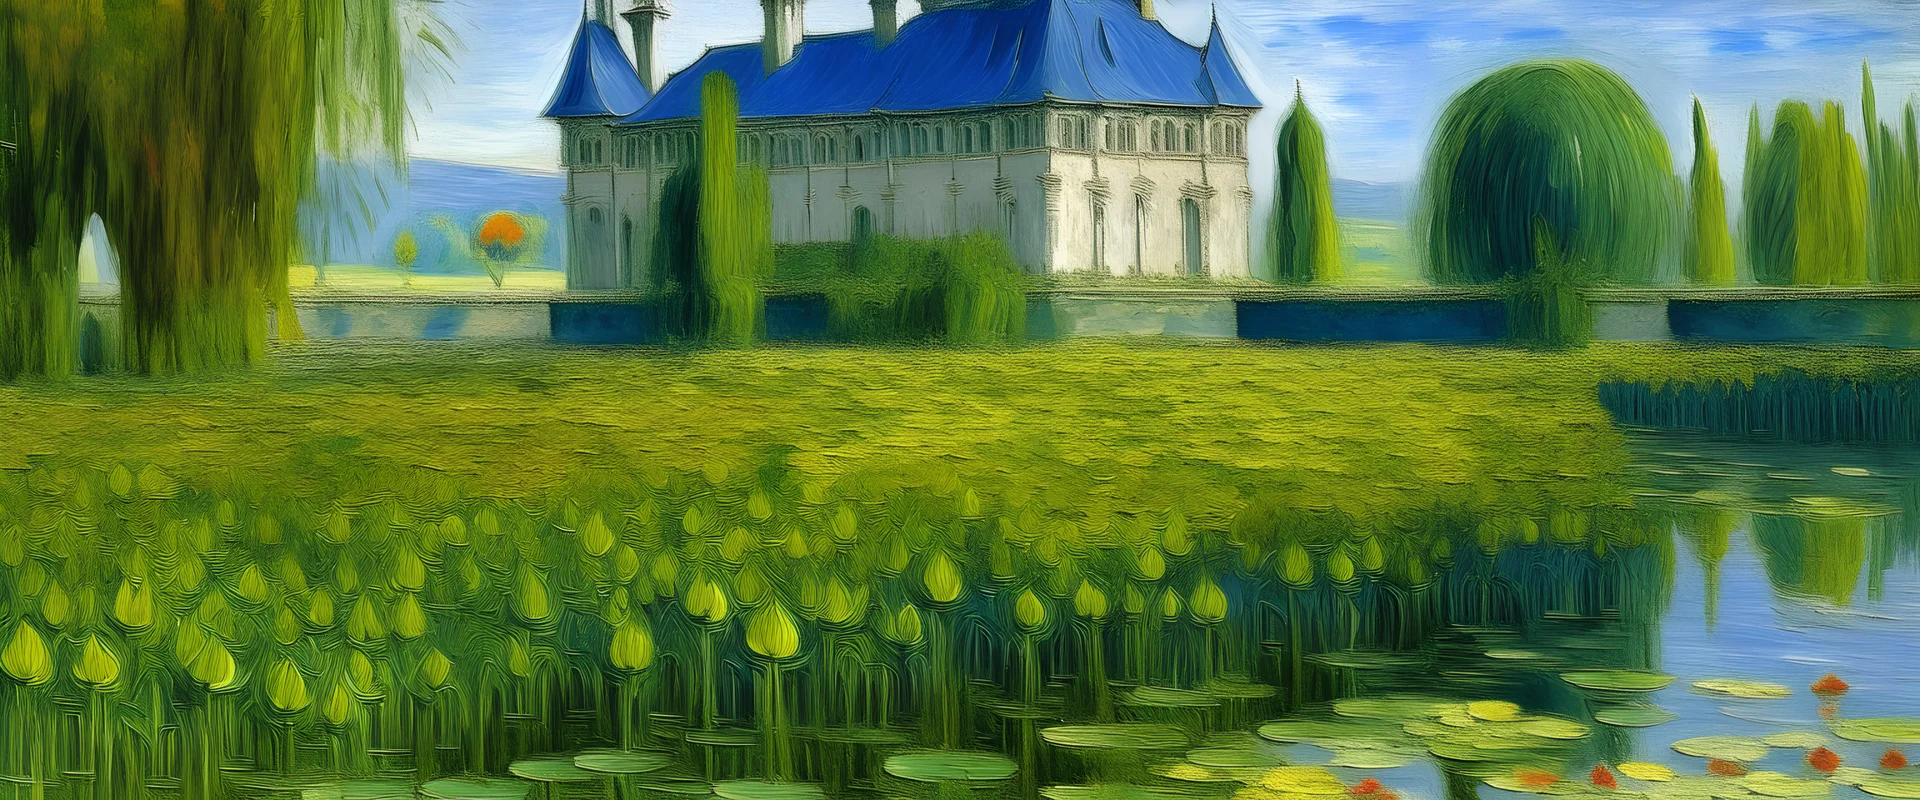 A castle near a lilypond painted by Claude Monet